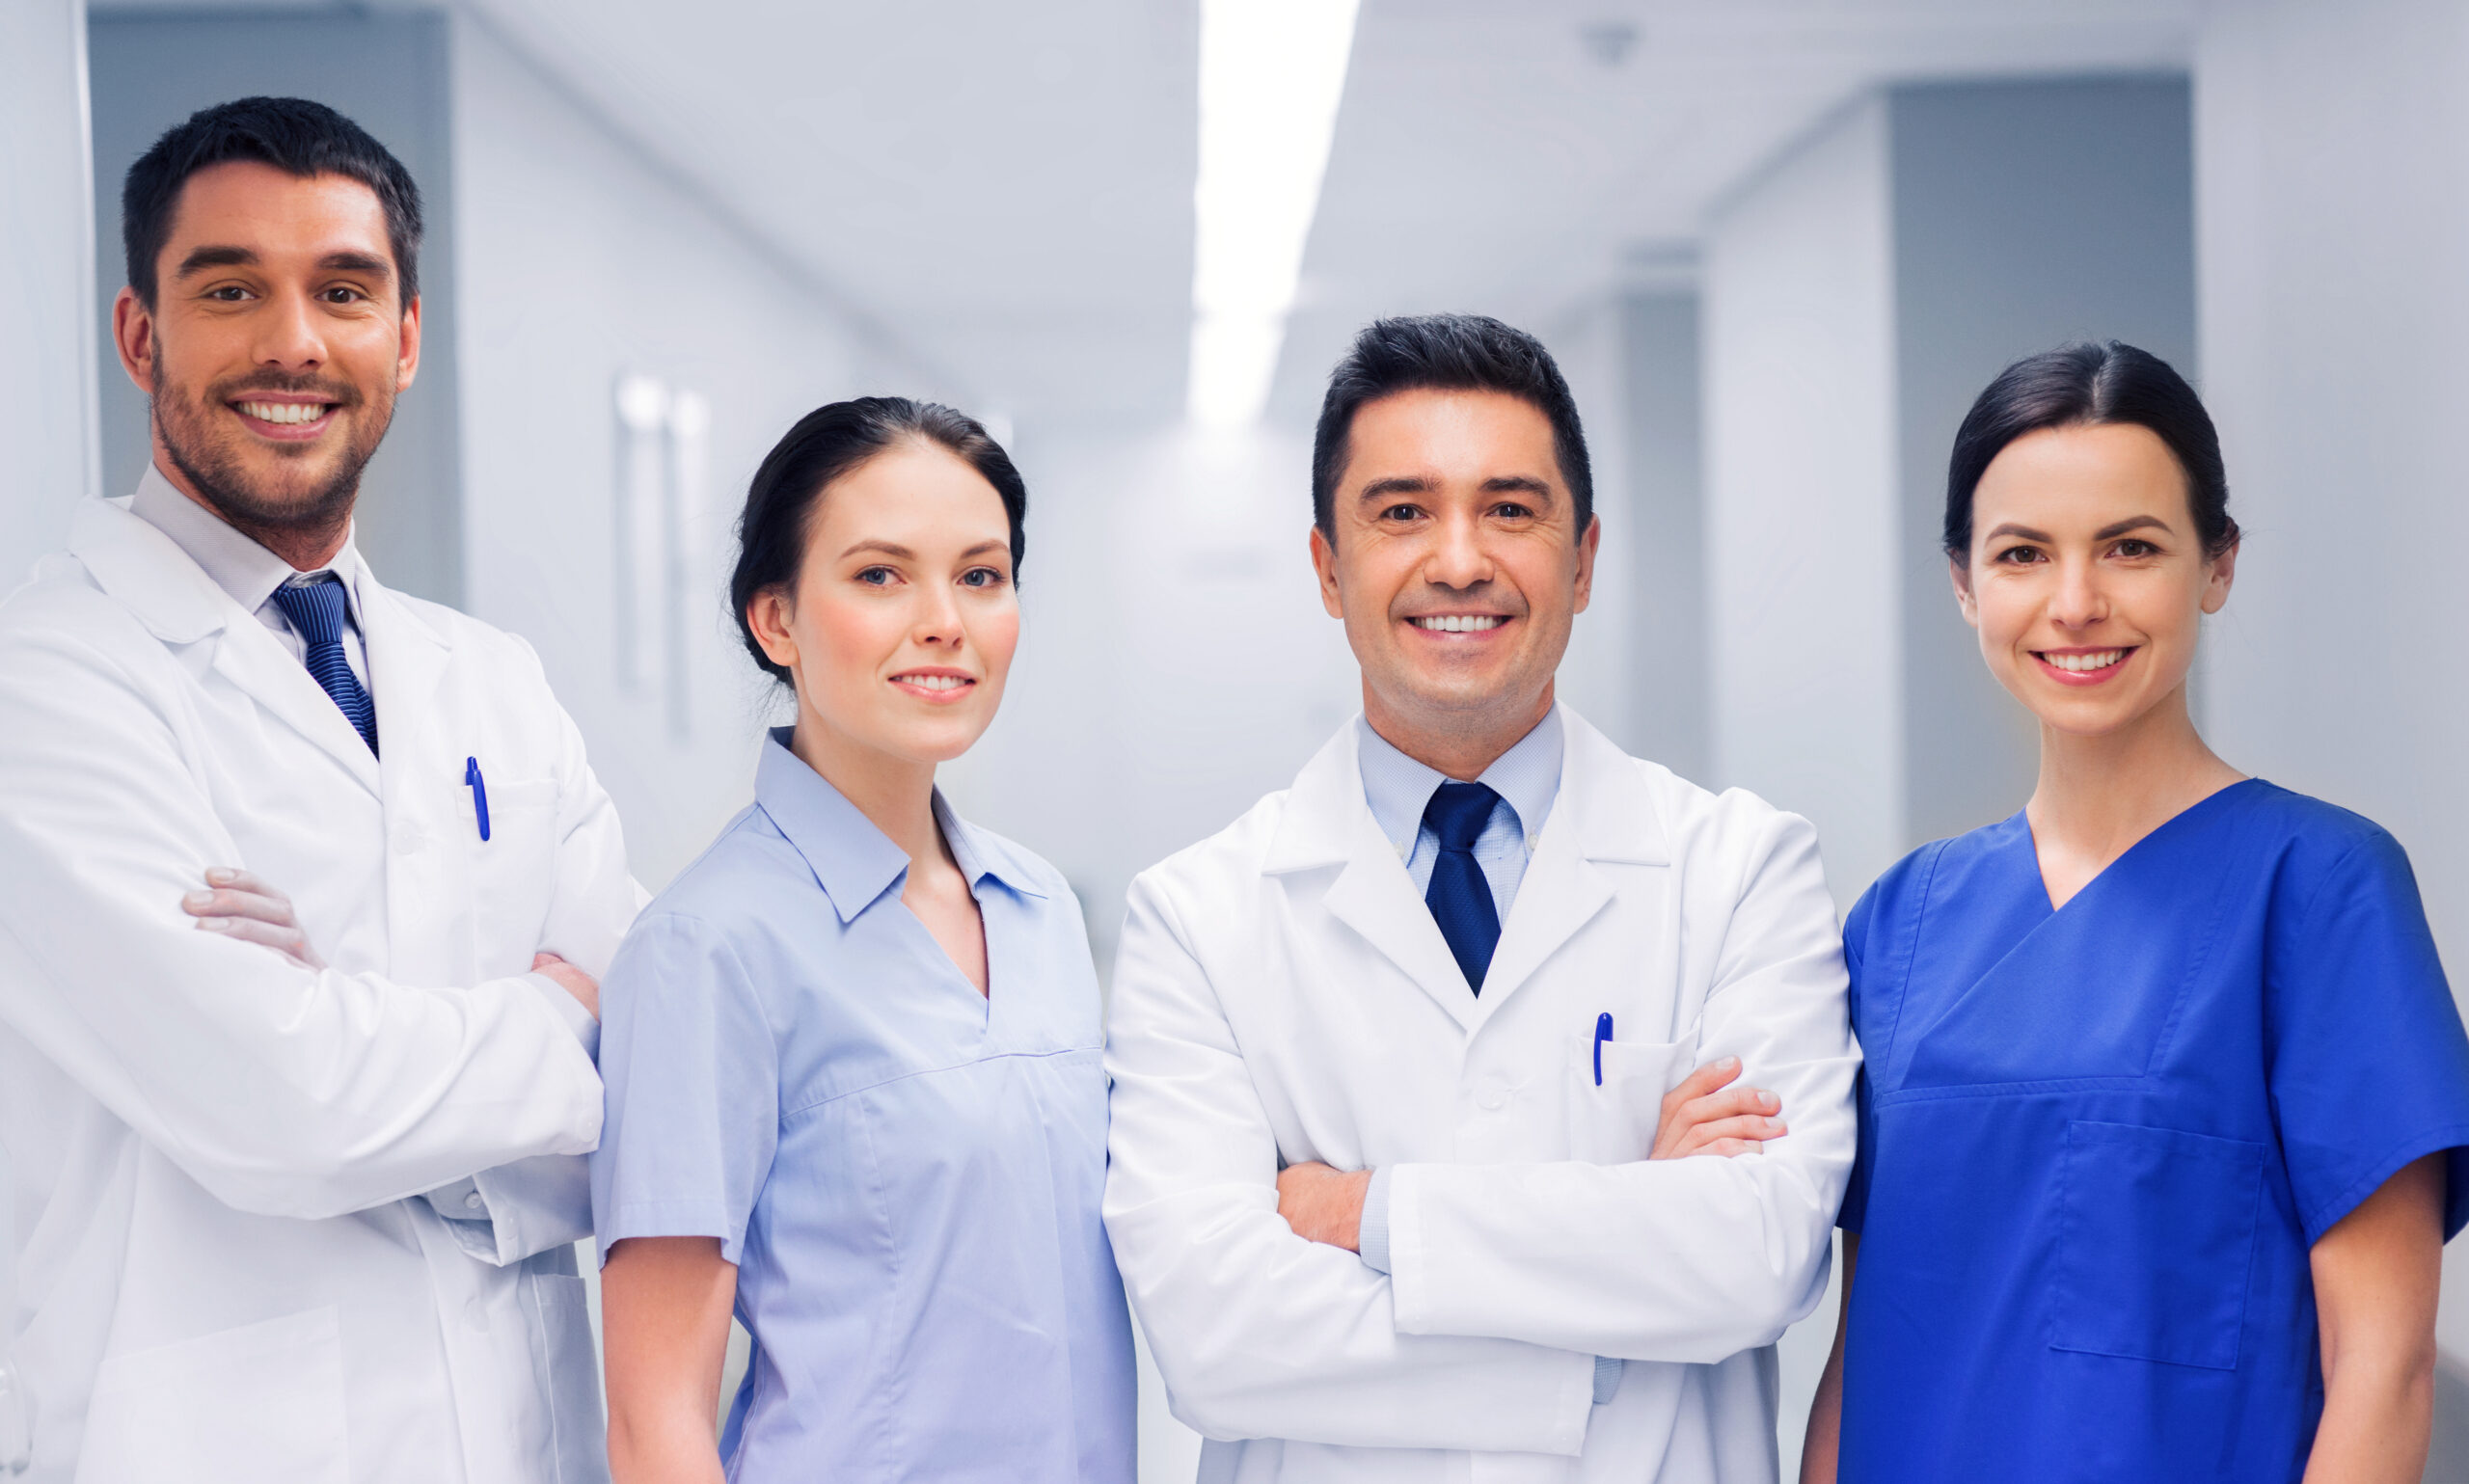 four medical professionals standing shoulder to shoulder smiling and crossing arms